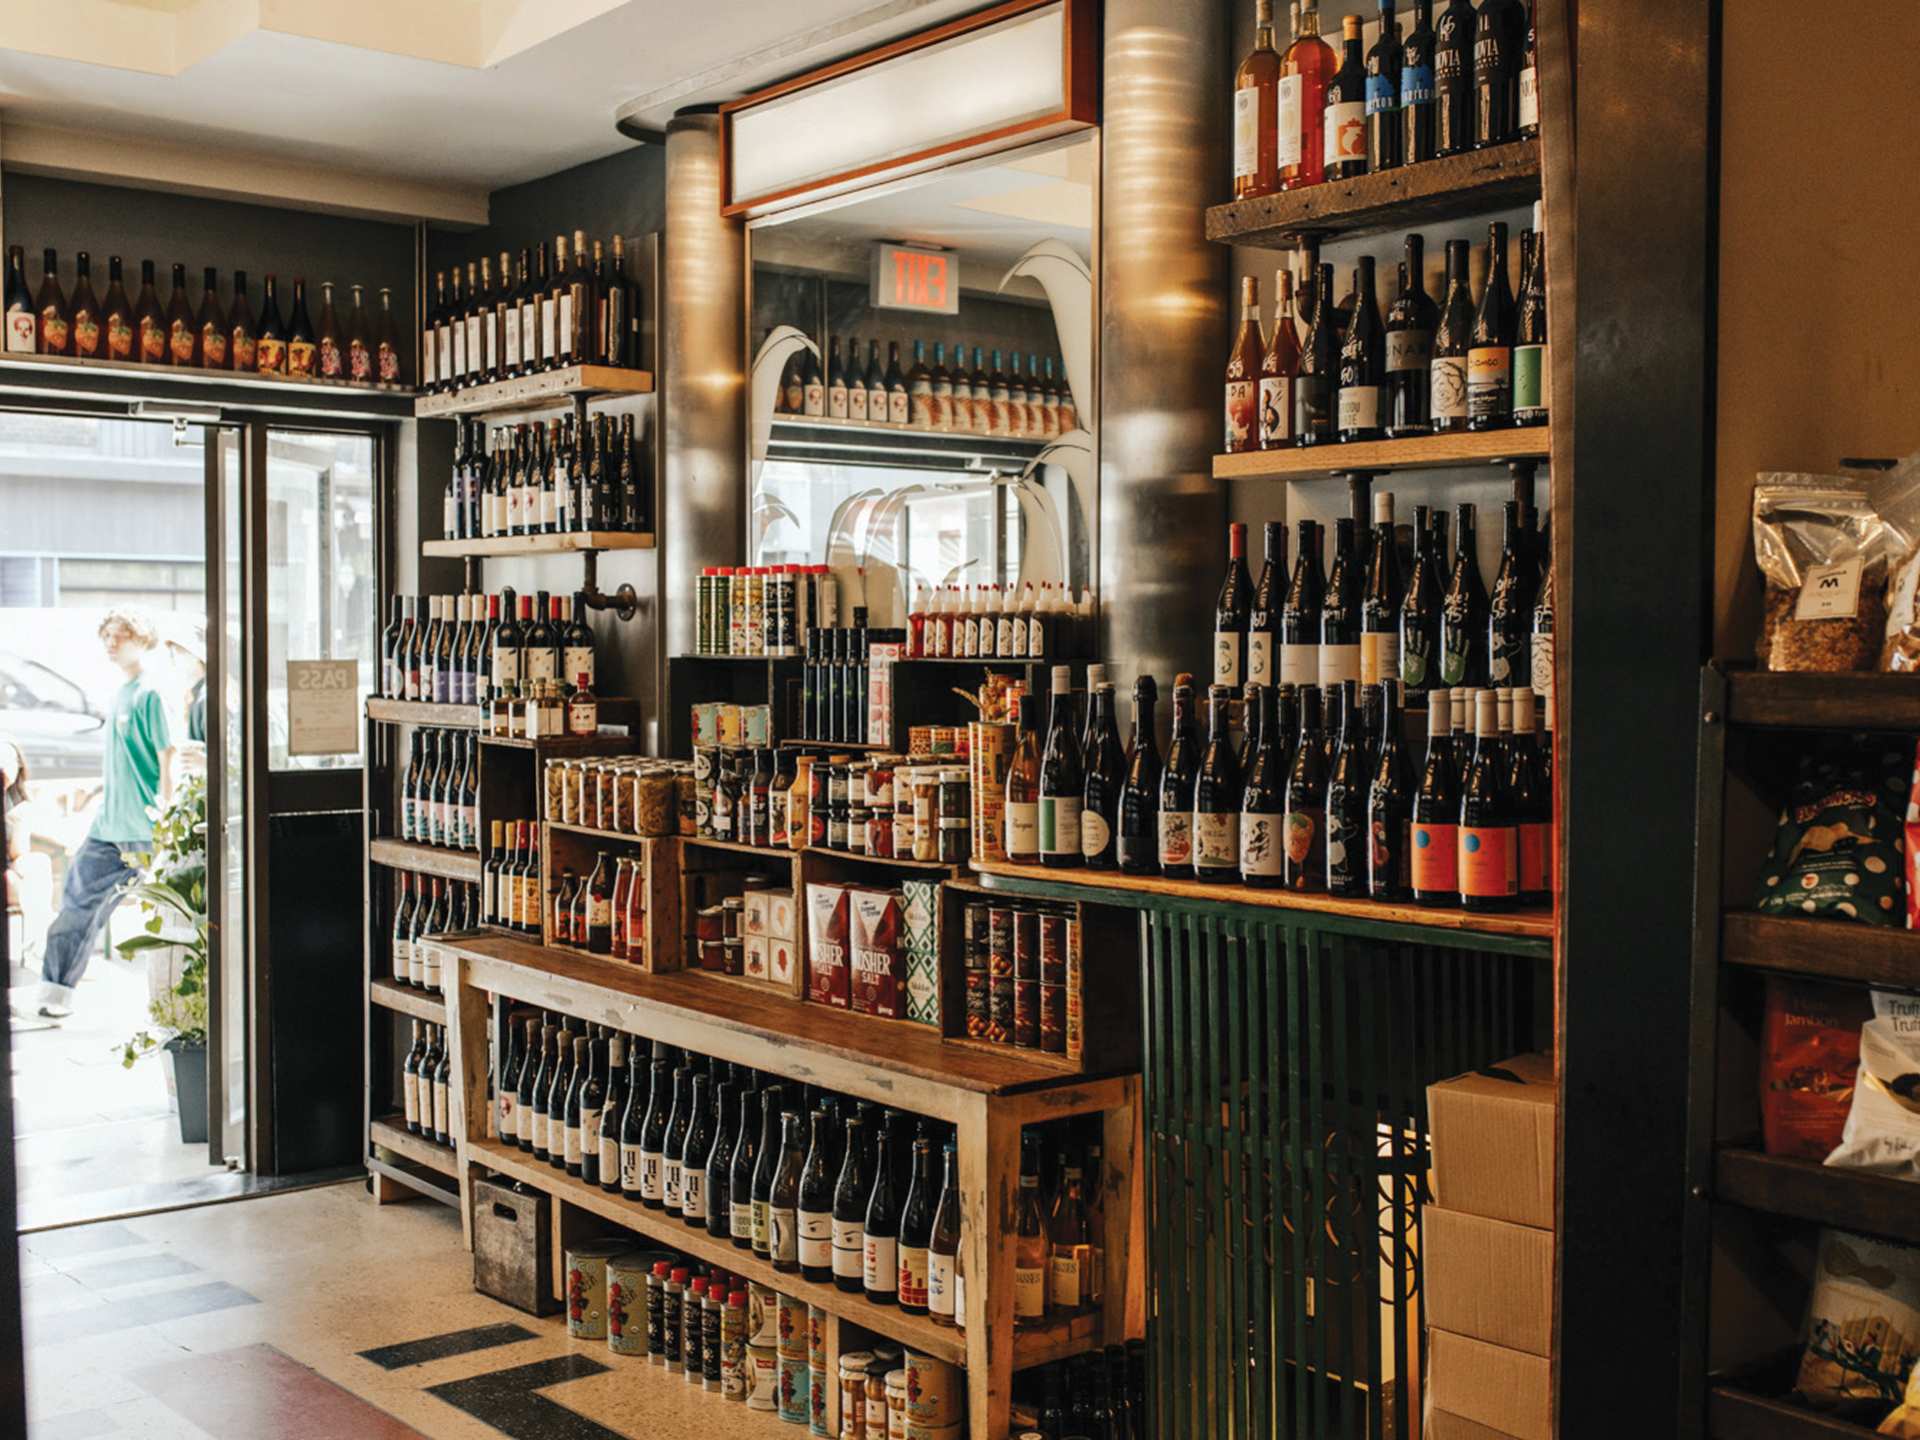 Toronto bottle shops and alcohol stores | Shelves of drinks at Bottega Volo in Littly Italy, Toronto